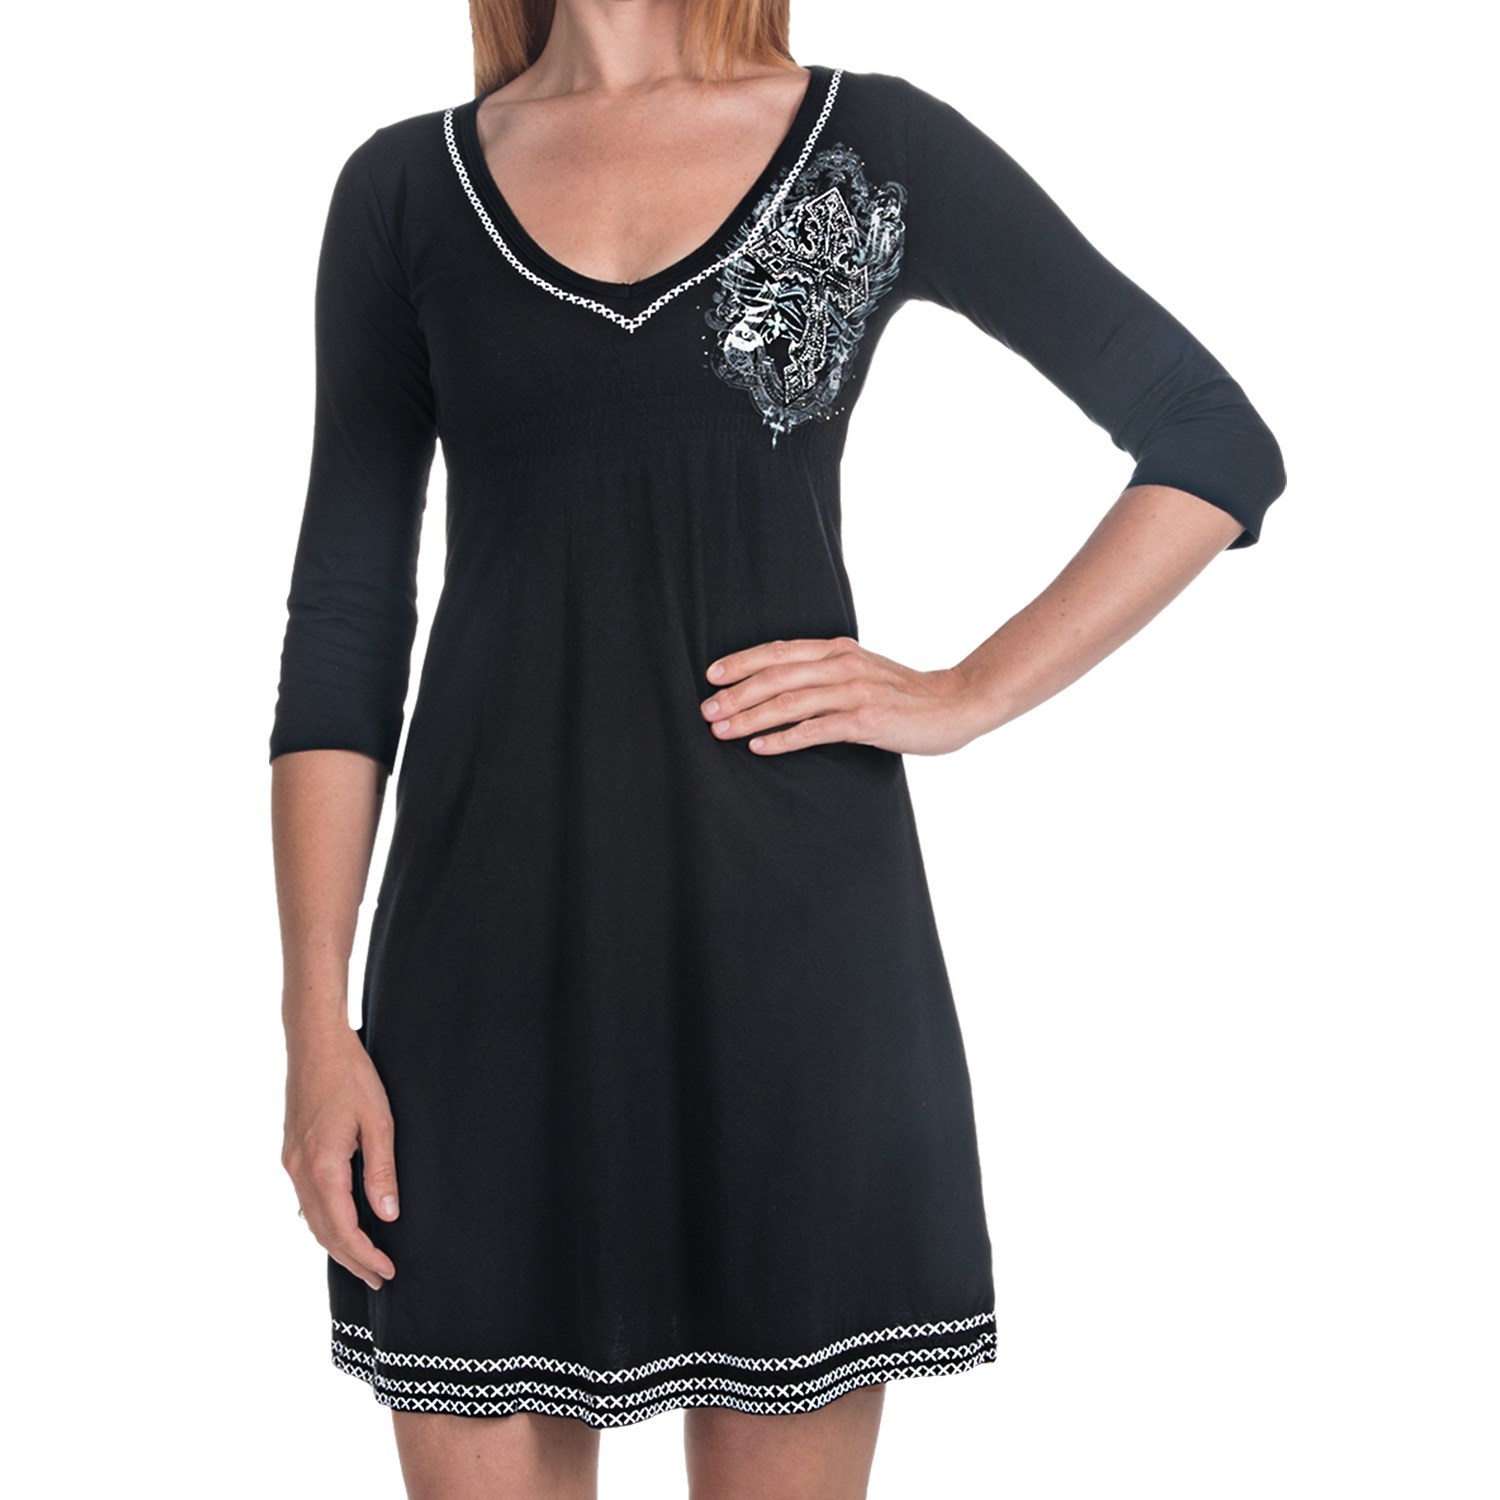 Rock & Roll Cowgirl Cross Embroidered Smocked Dress (For Women) 5253X 92